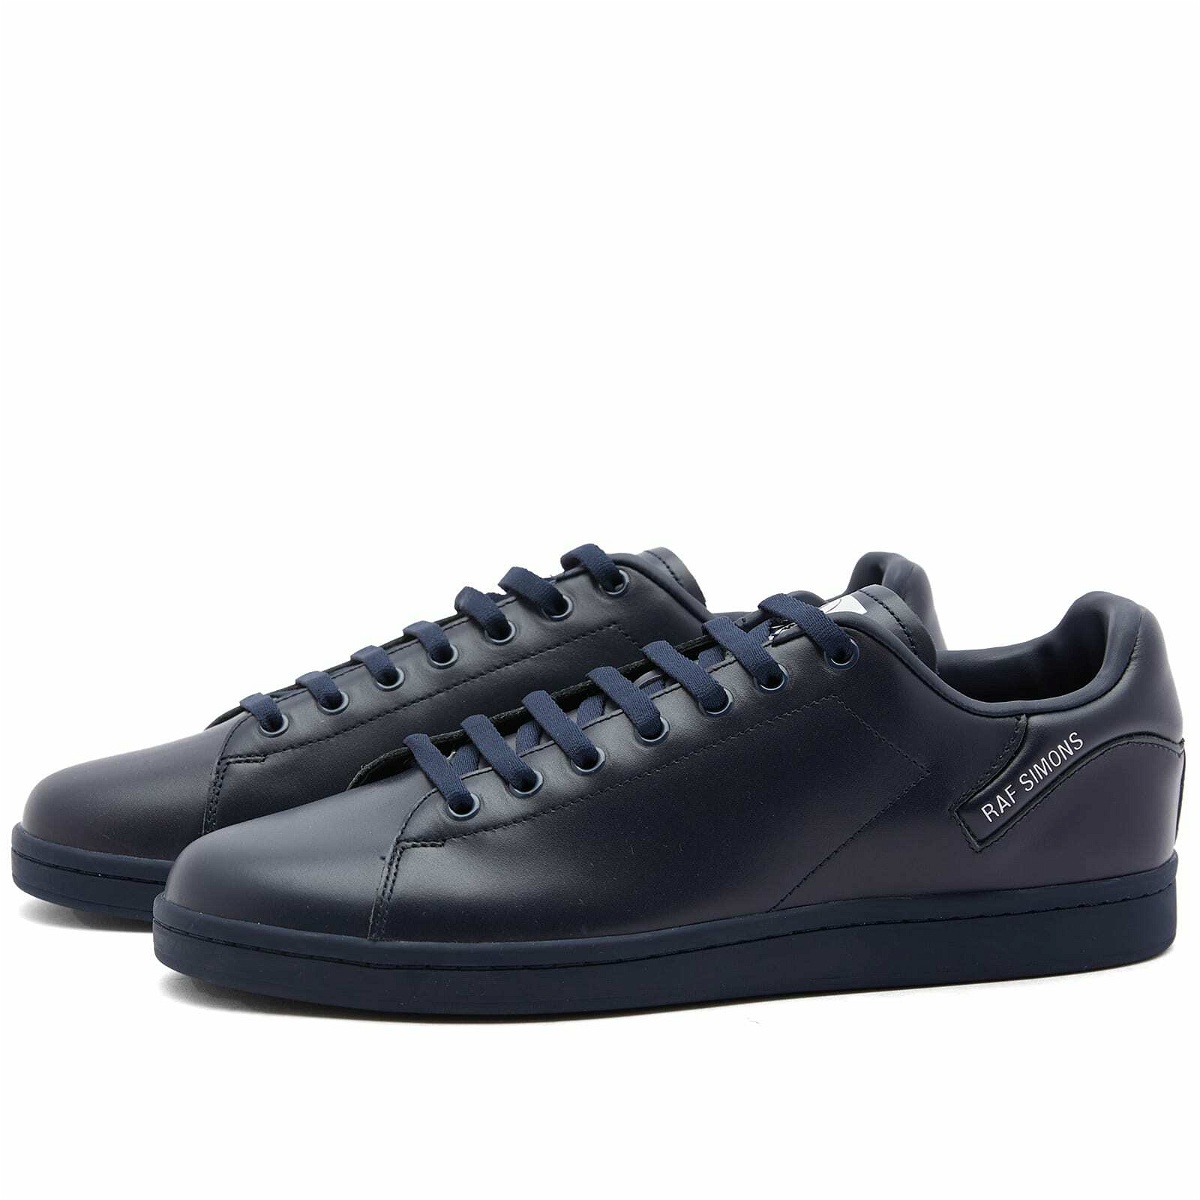 Raf Simons Men's Orion Cupsole Leather Cupsole Sneakers in Navy Raf Simons